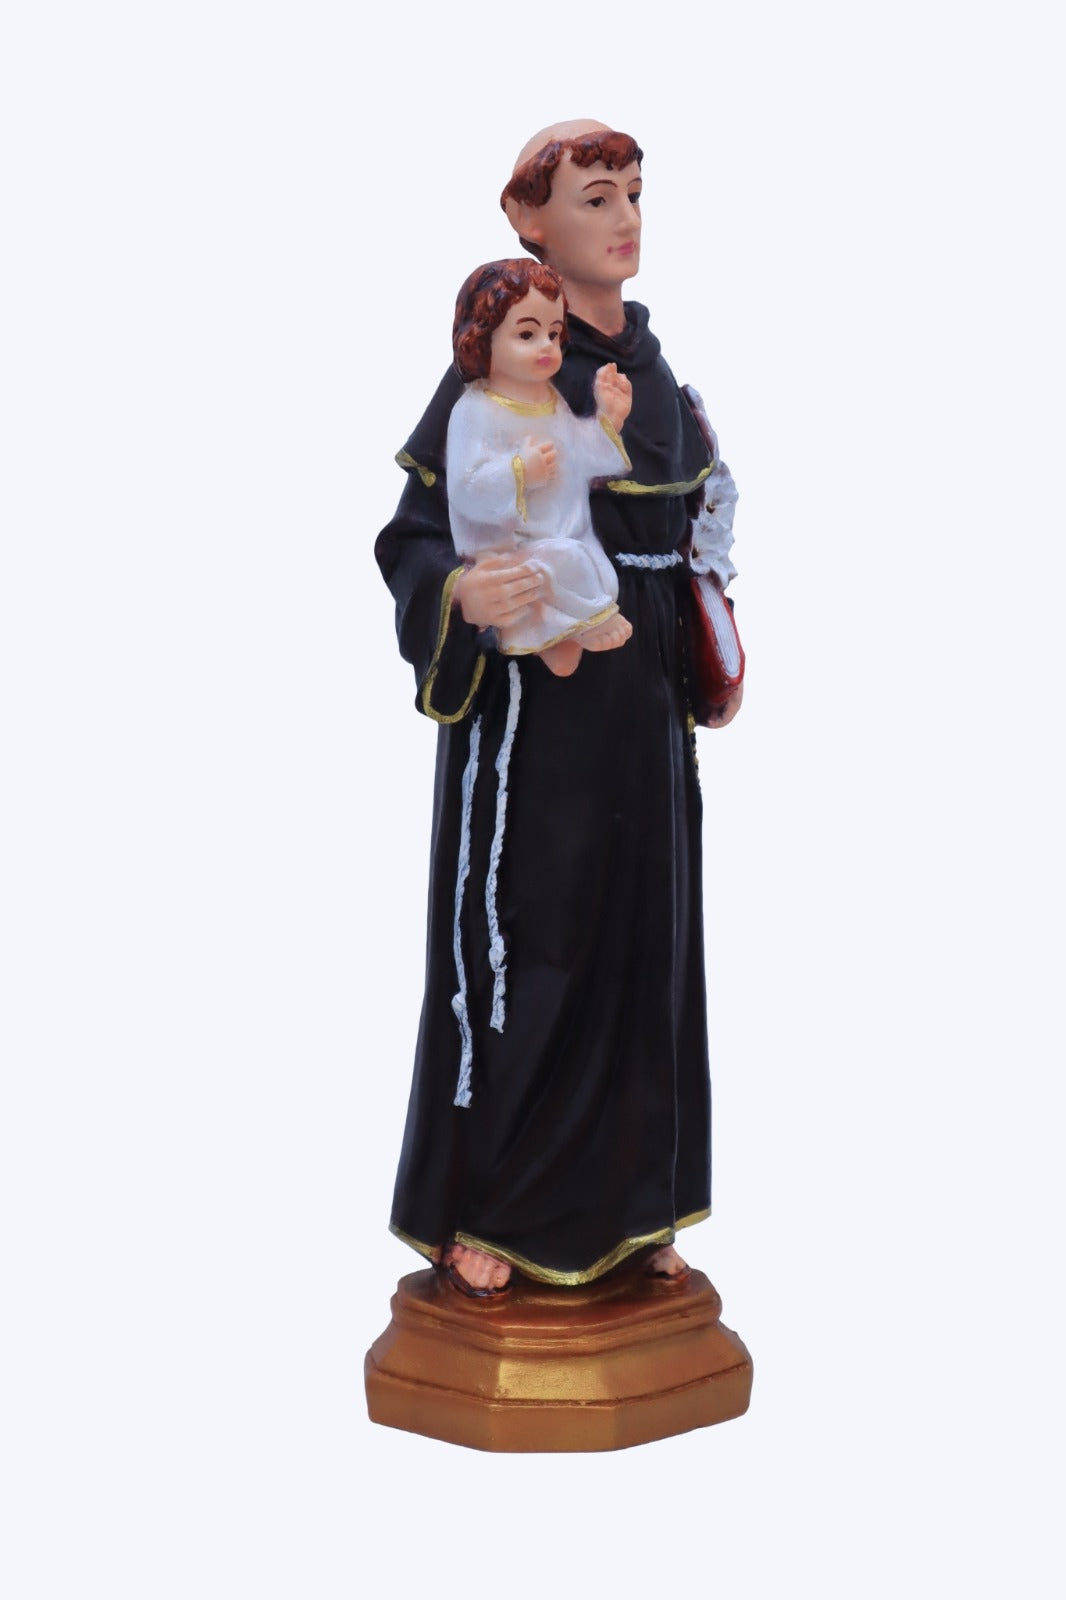 Shop Our Stunning Collection of St. Anthony 11 Inch Statues at Living Words